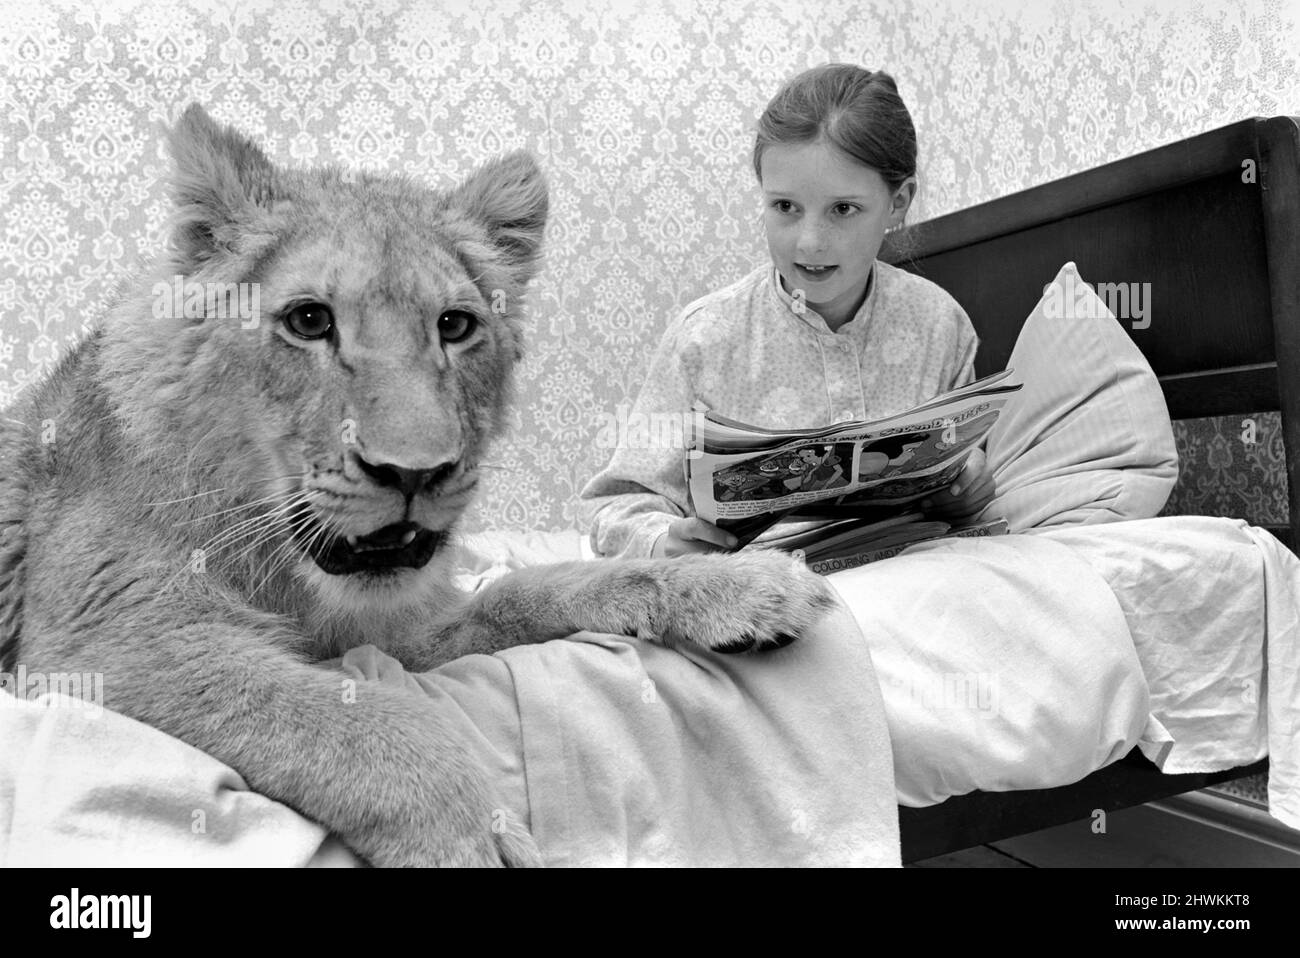 'Leonie' the Lioness. Leonie is the favourite pet of the youngest daughter of the Clarke family, Yvonne (aged 9) who quite often sleeps with a snake or two in her bed. But yesterday she read a bedtime story to Leonie. April 1972 72-04599-009 Stock Photo